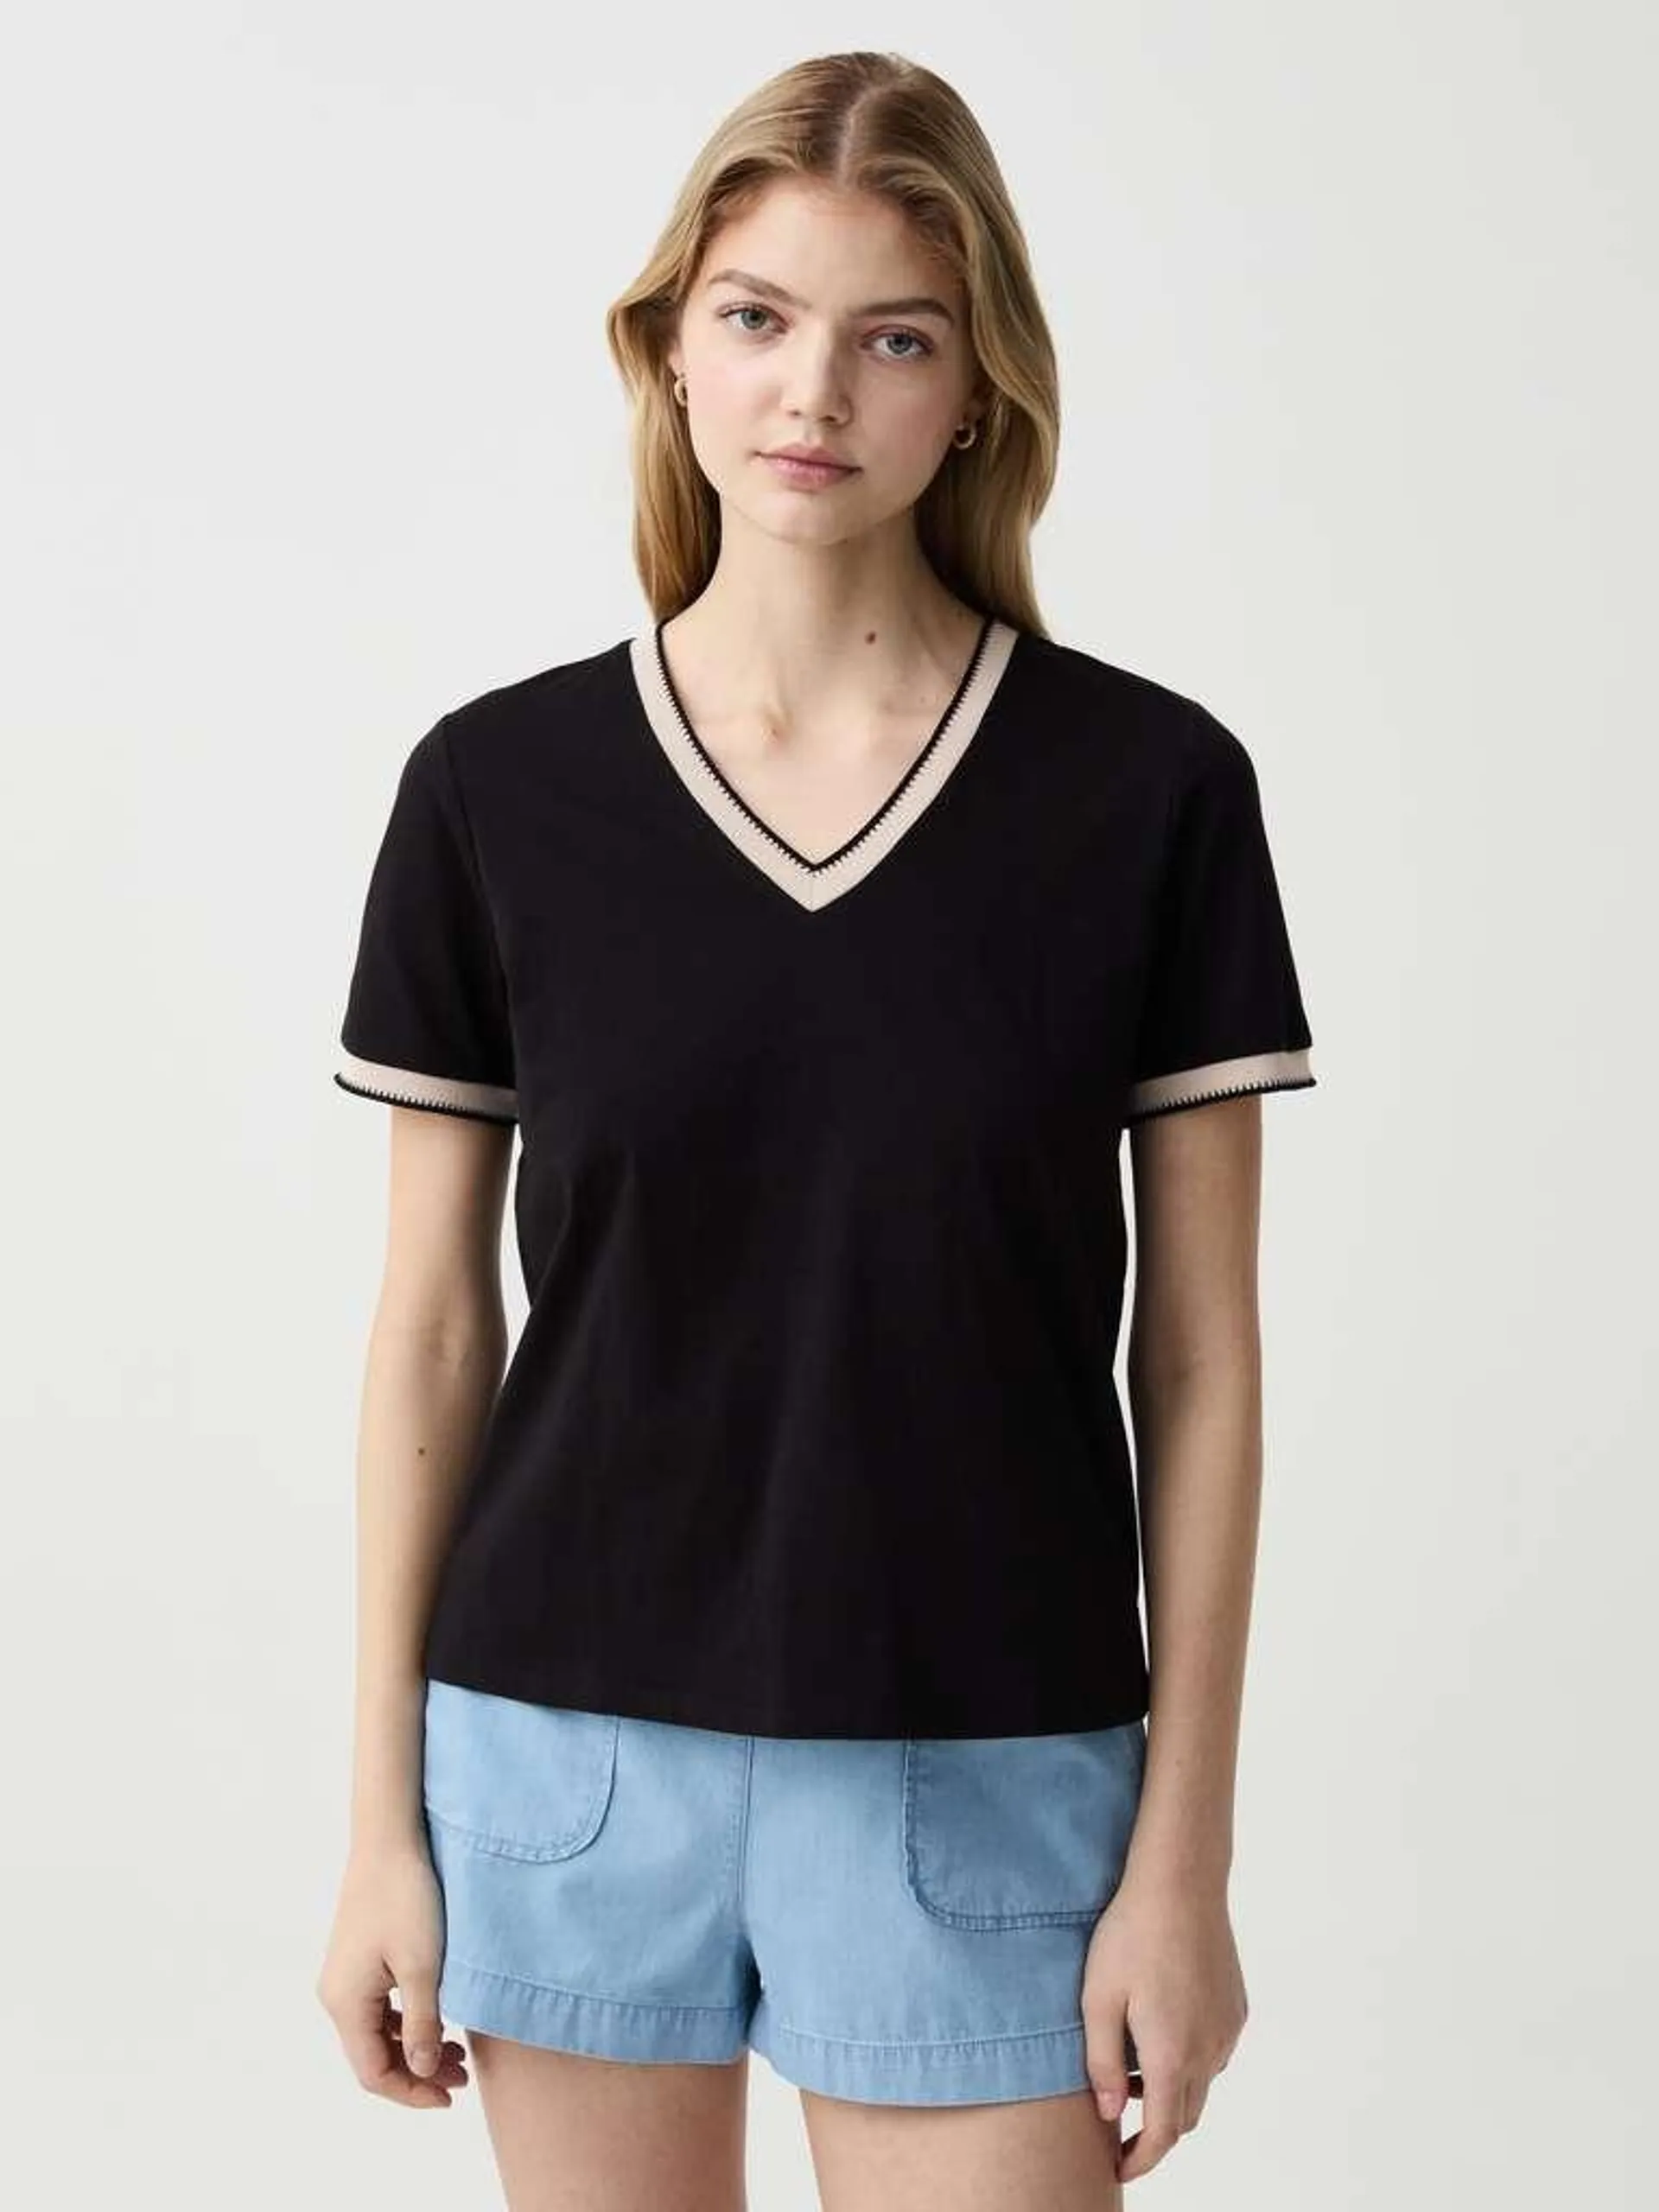 Black T-shirt with V neck and striped edging